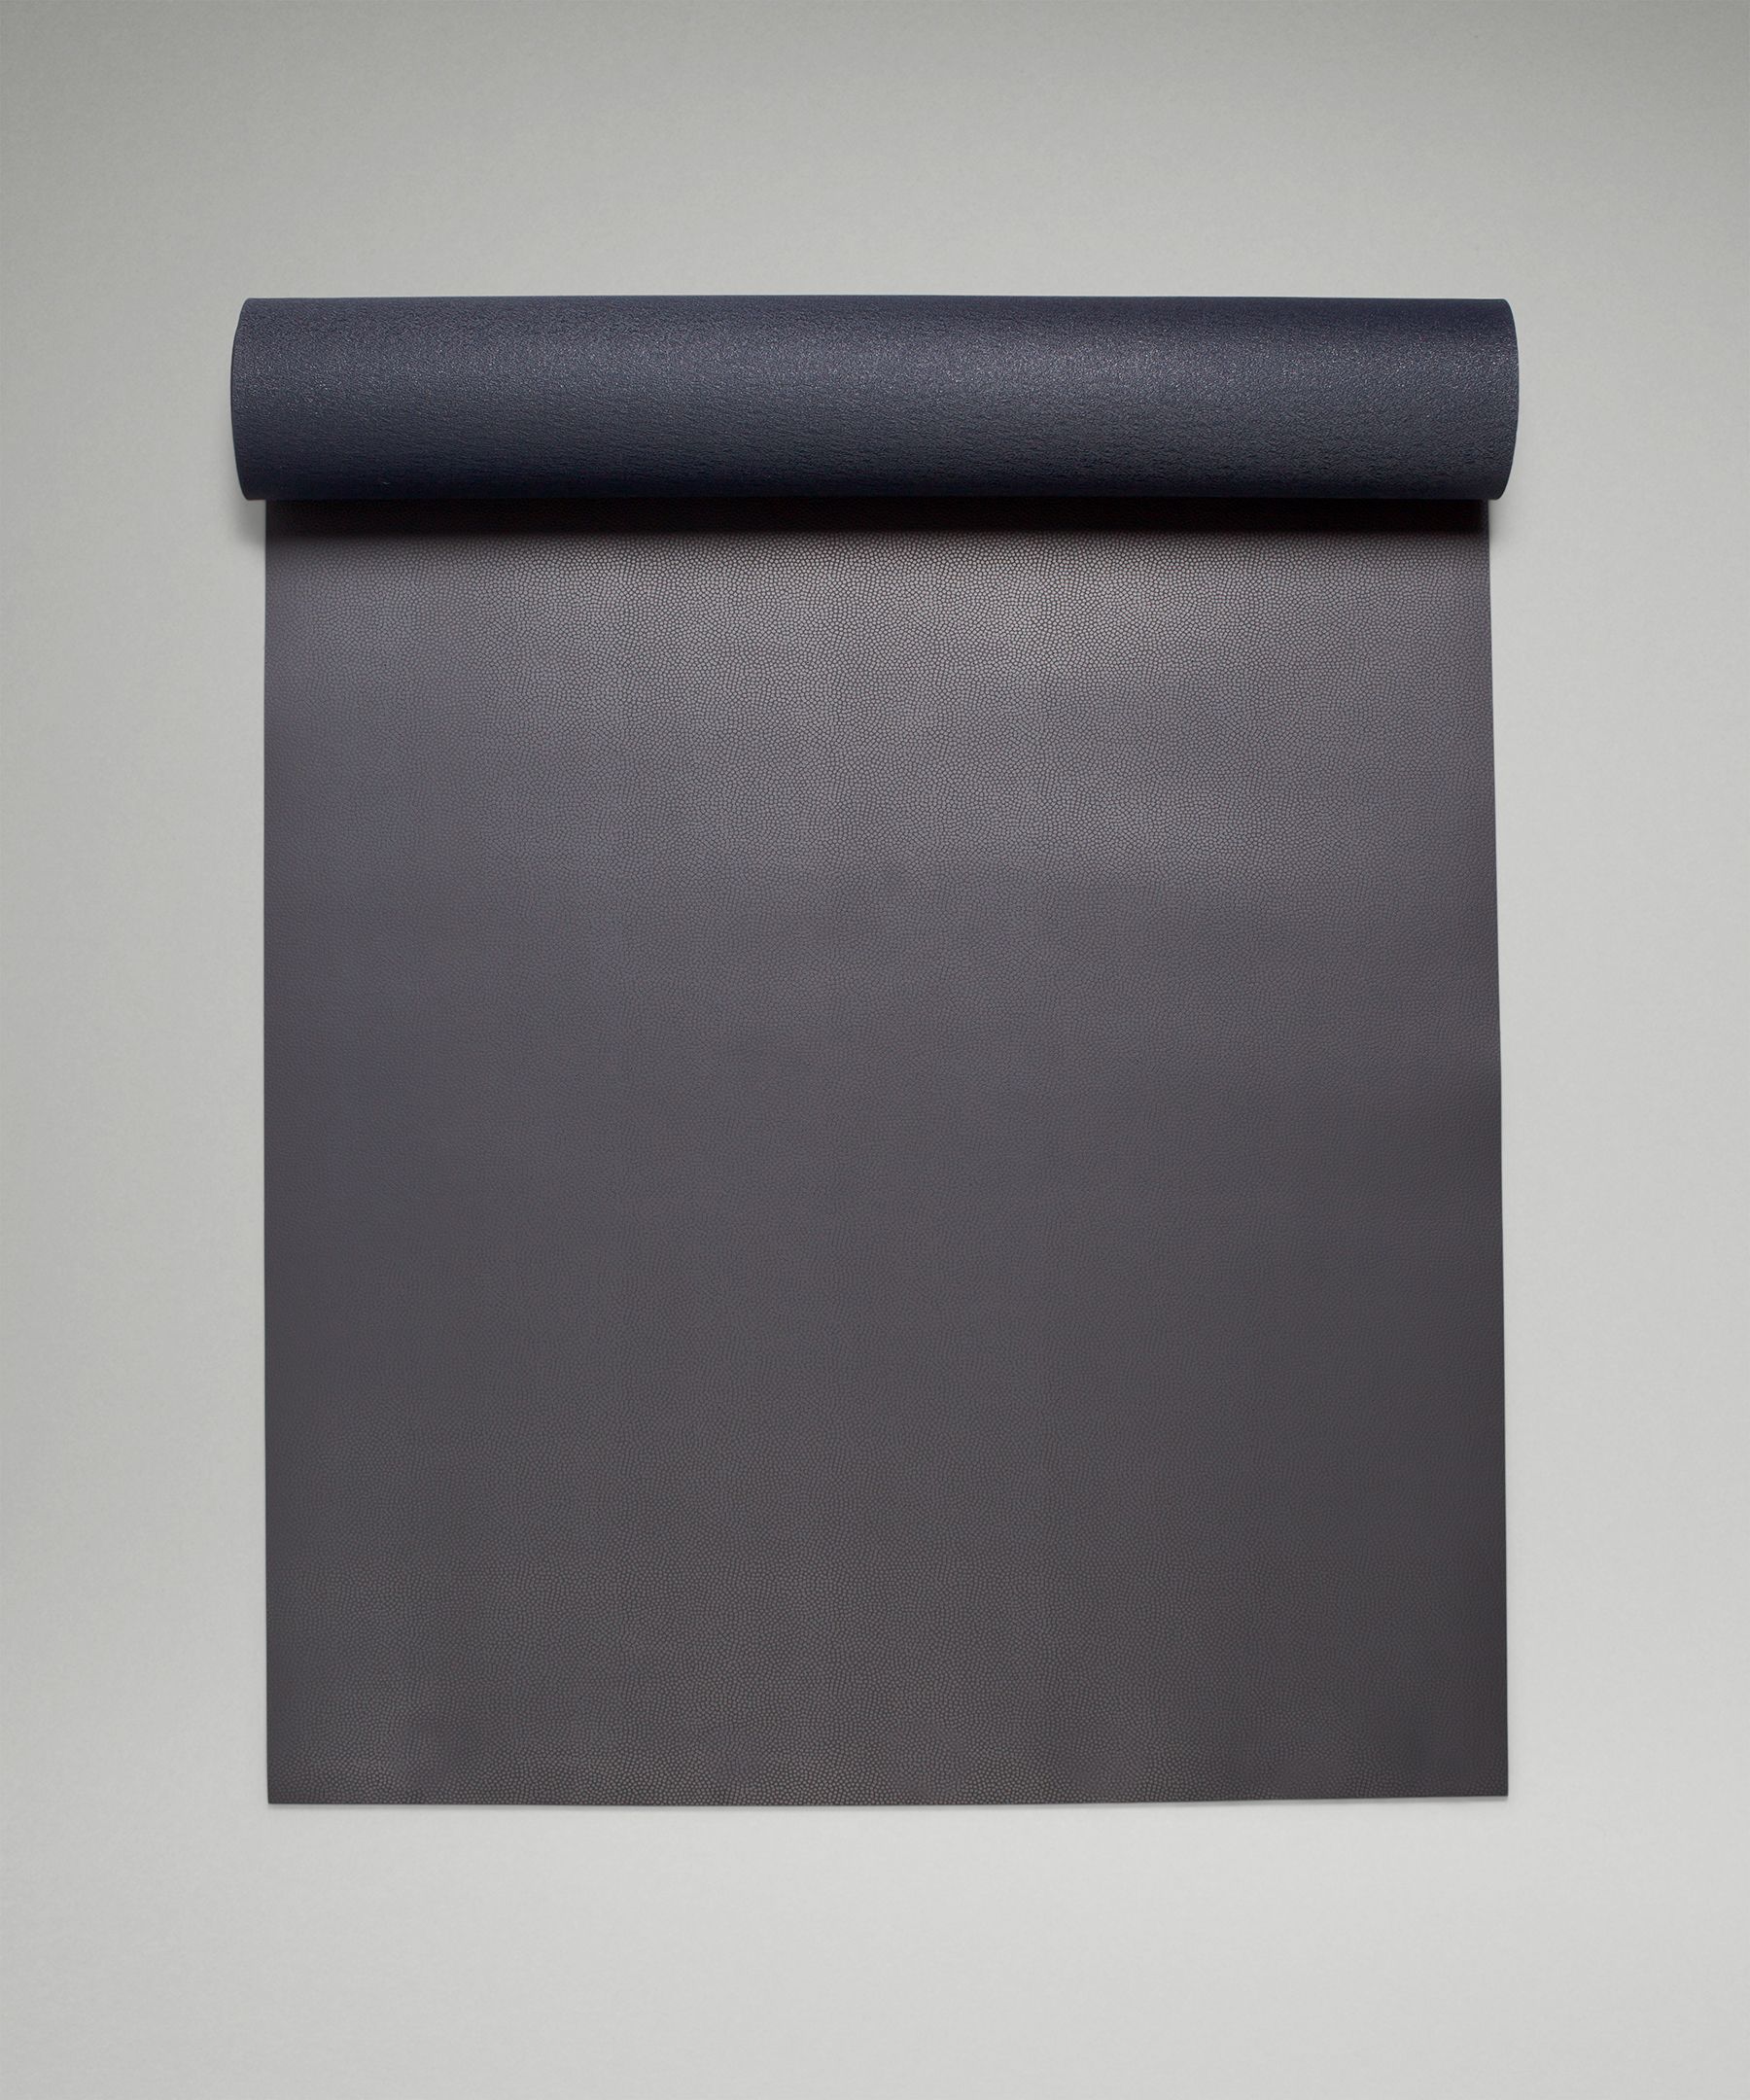 Lululemon The Mat 5mm Textured Made With Fsc-certified Rubber In Black ...